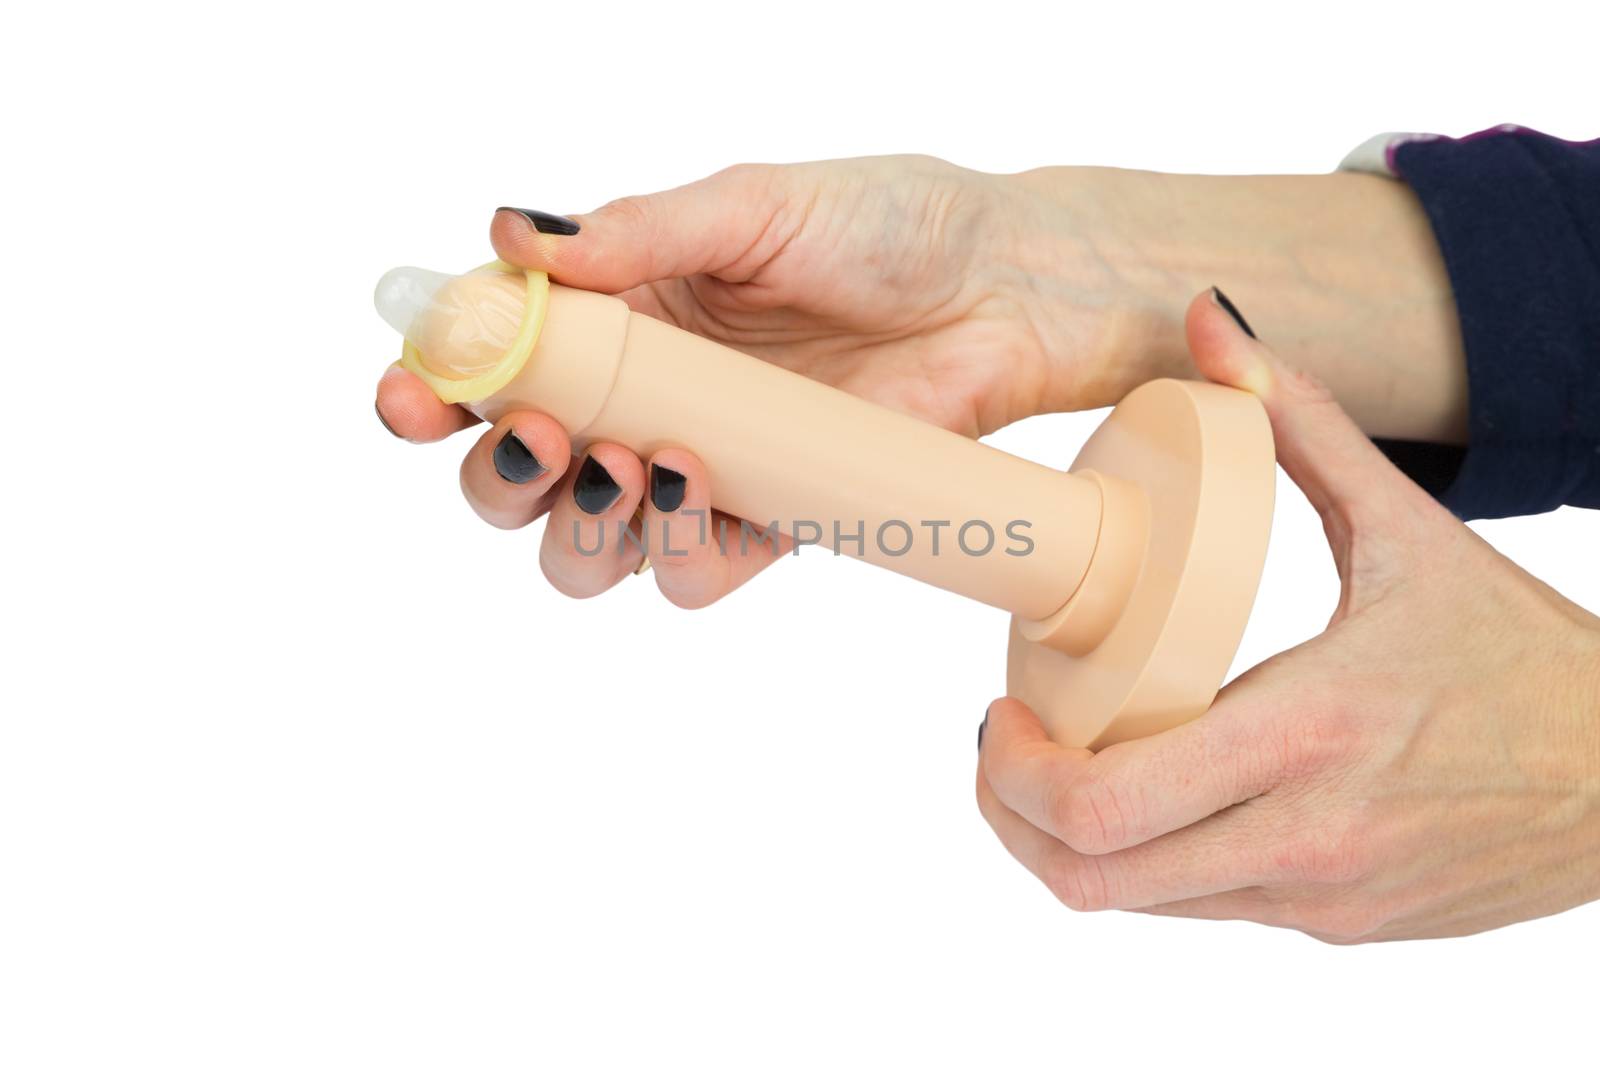 Hands of woman showing condom use on plastic penis model isolated on white background